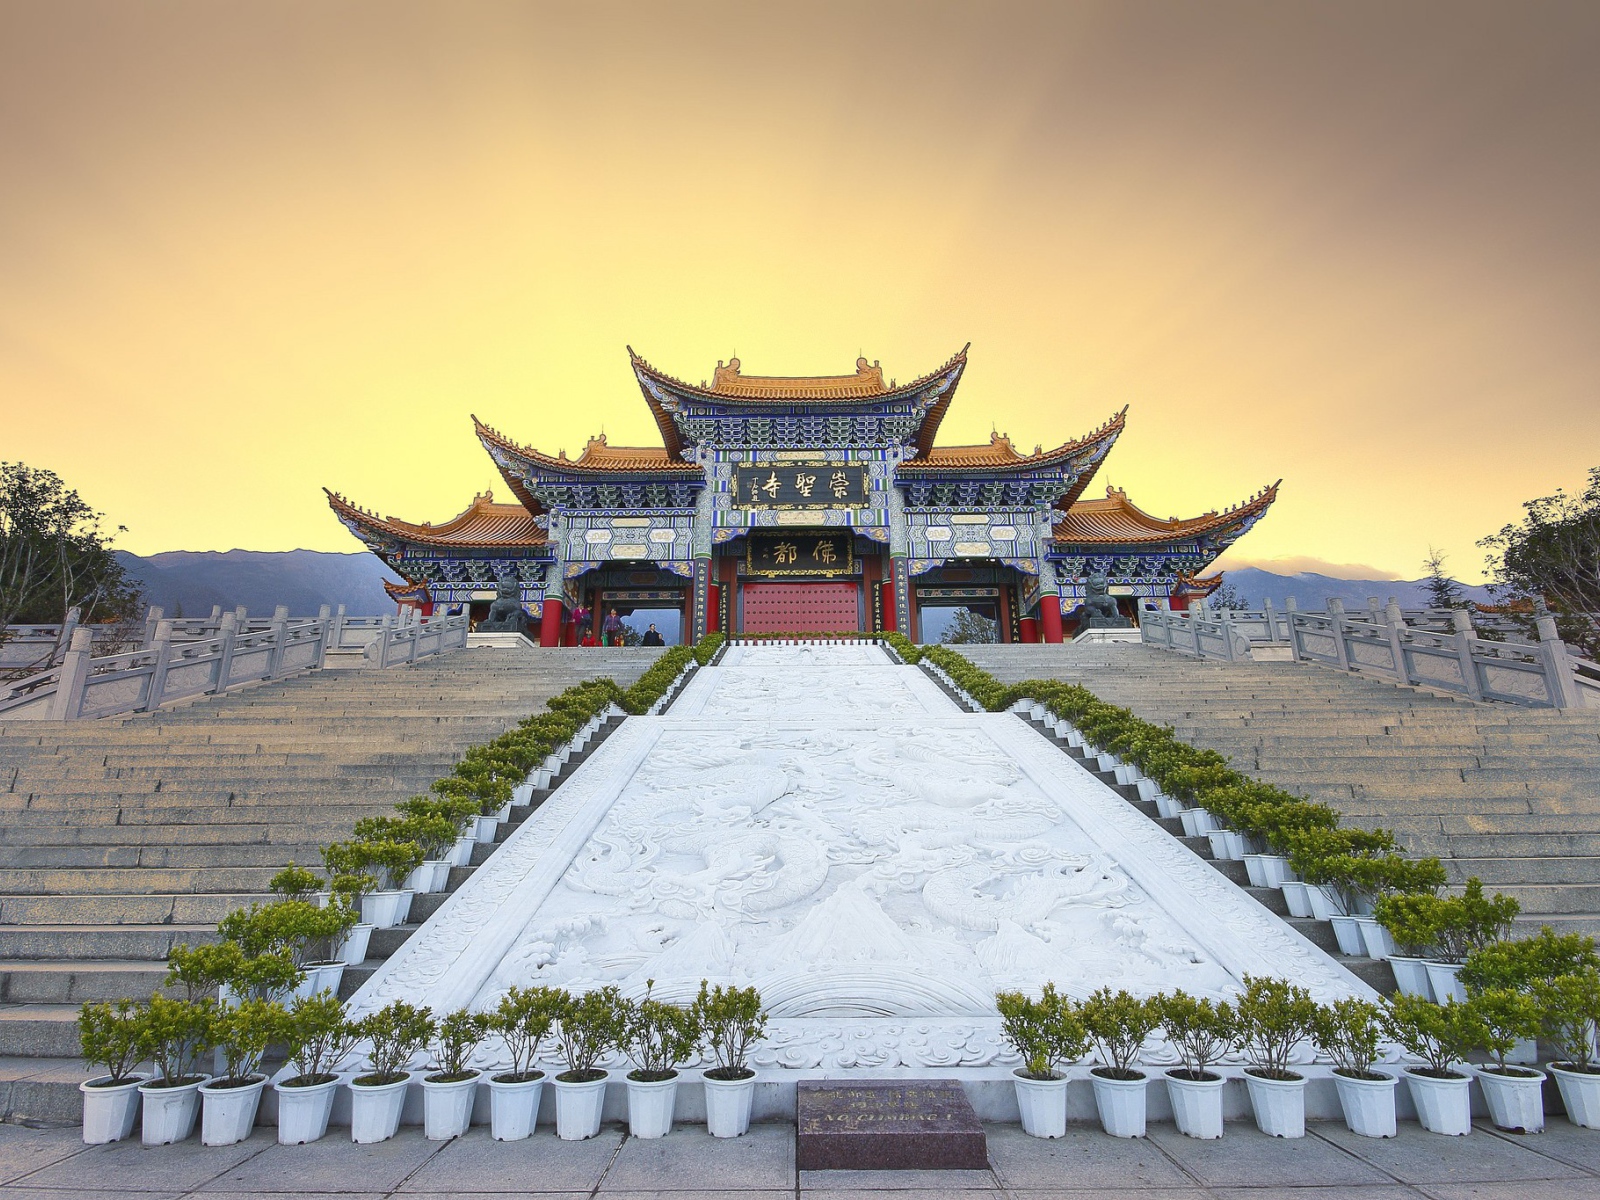 The architecture of ancient China